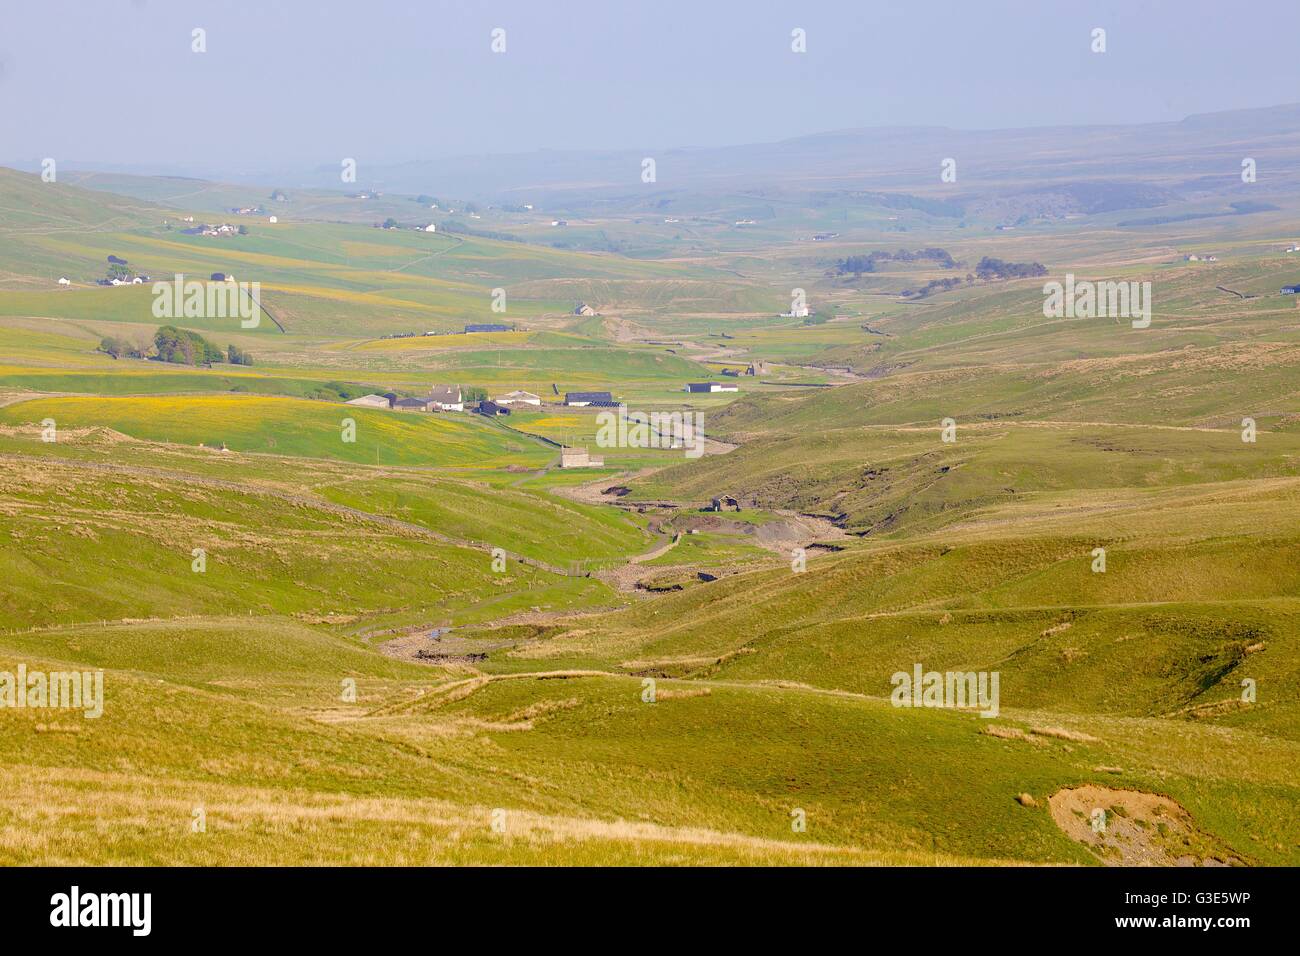 Moorland sopra Harwood Beck, Fiume Tees, foresta di Teesdale, North Pennines, Durham Dales, County Durham, Inghilterra, Regno Unito. Foto Stock